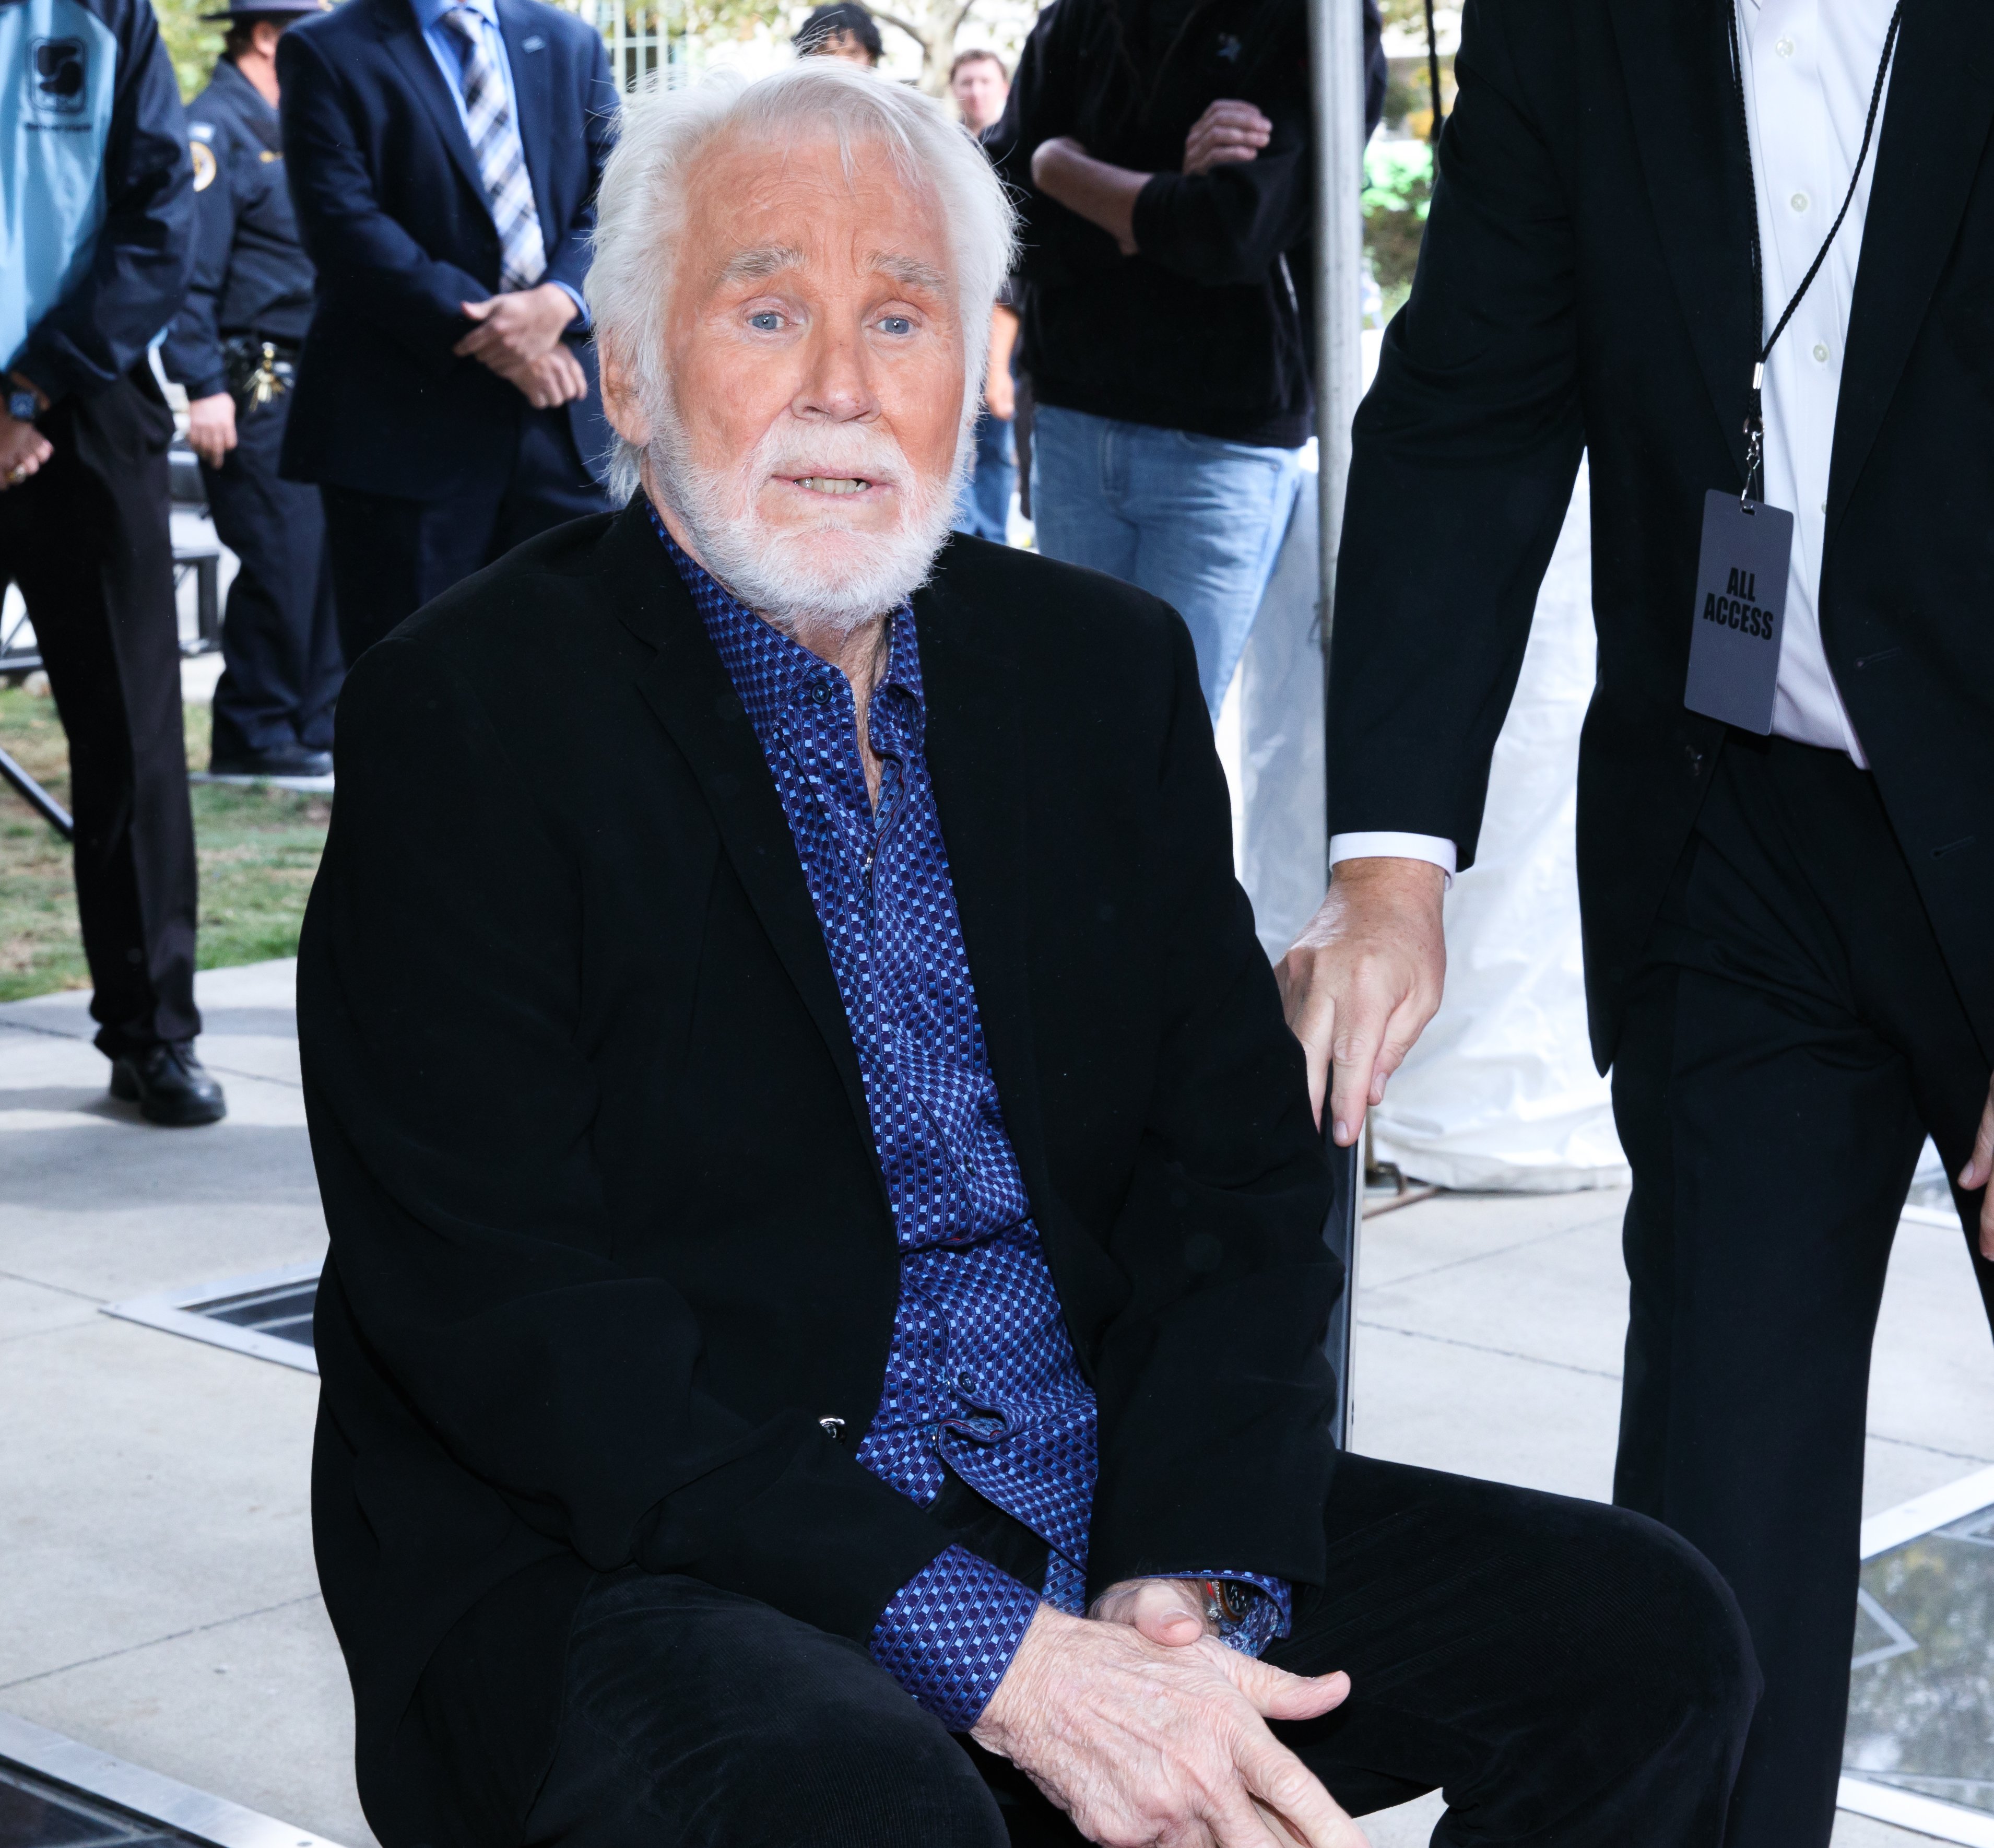 Kenny Rogers being inducted into the Nashville Music City Walk of Fame in 2017 in Nashville, Tennessee | Photo: Getty Images